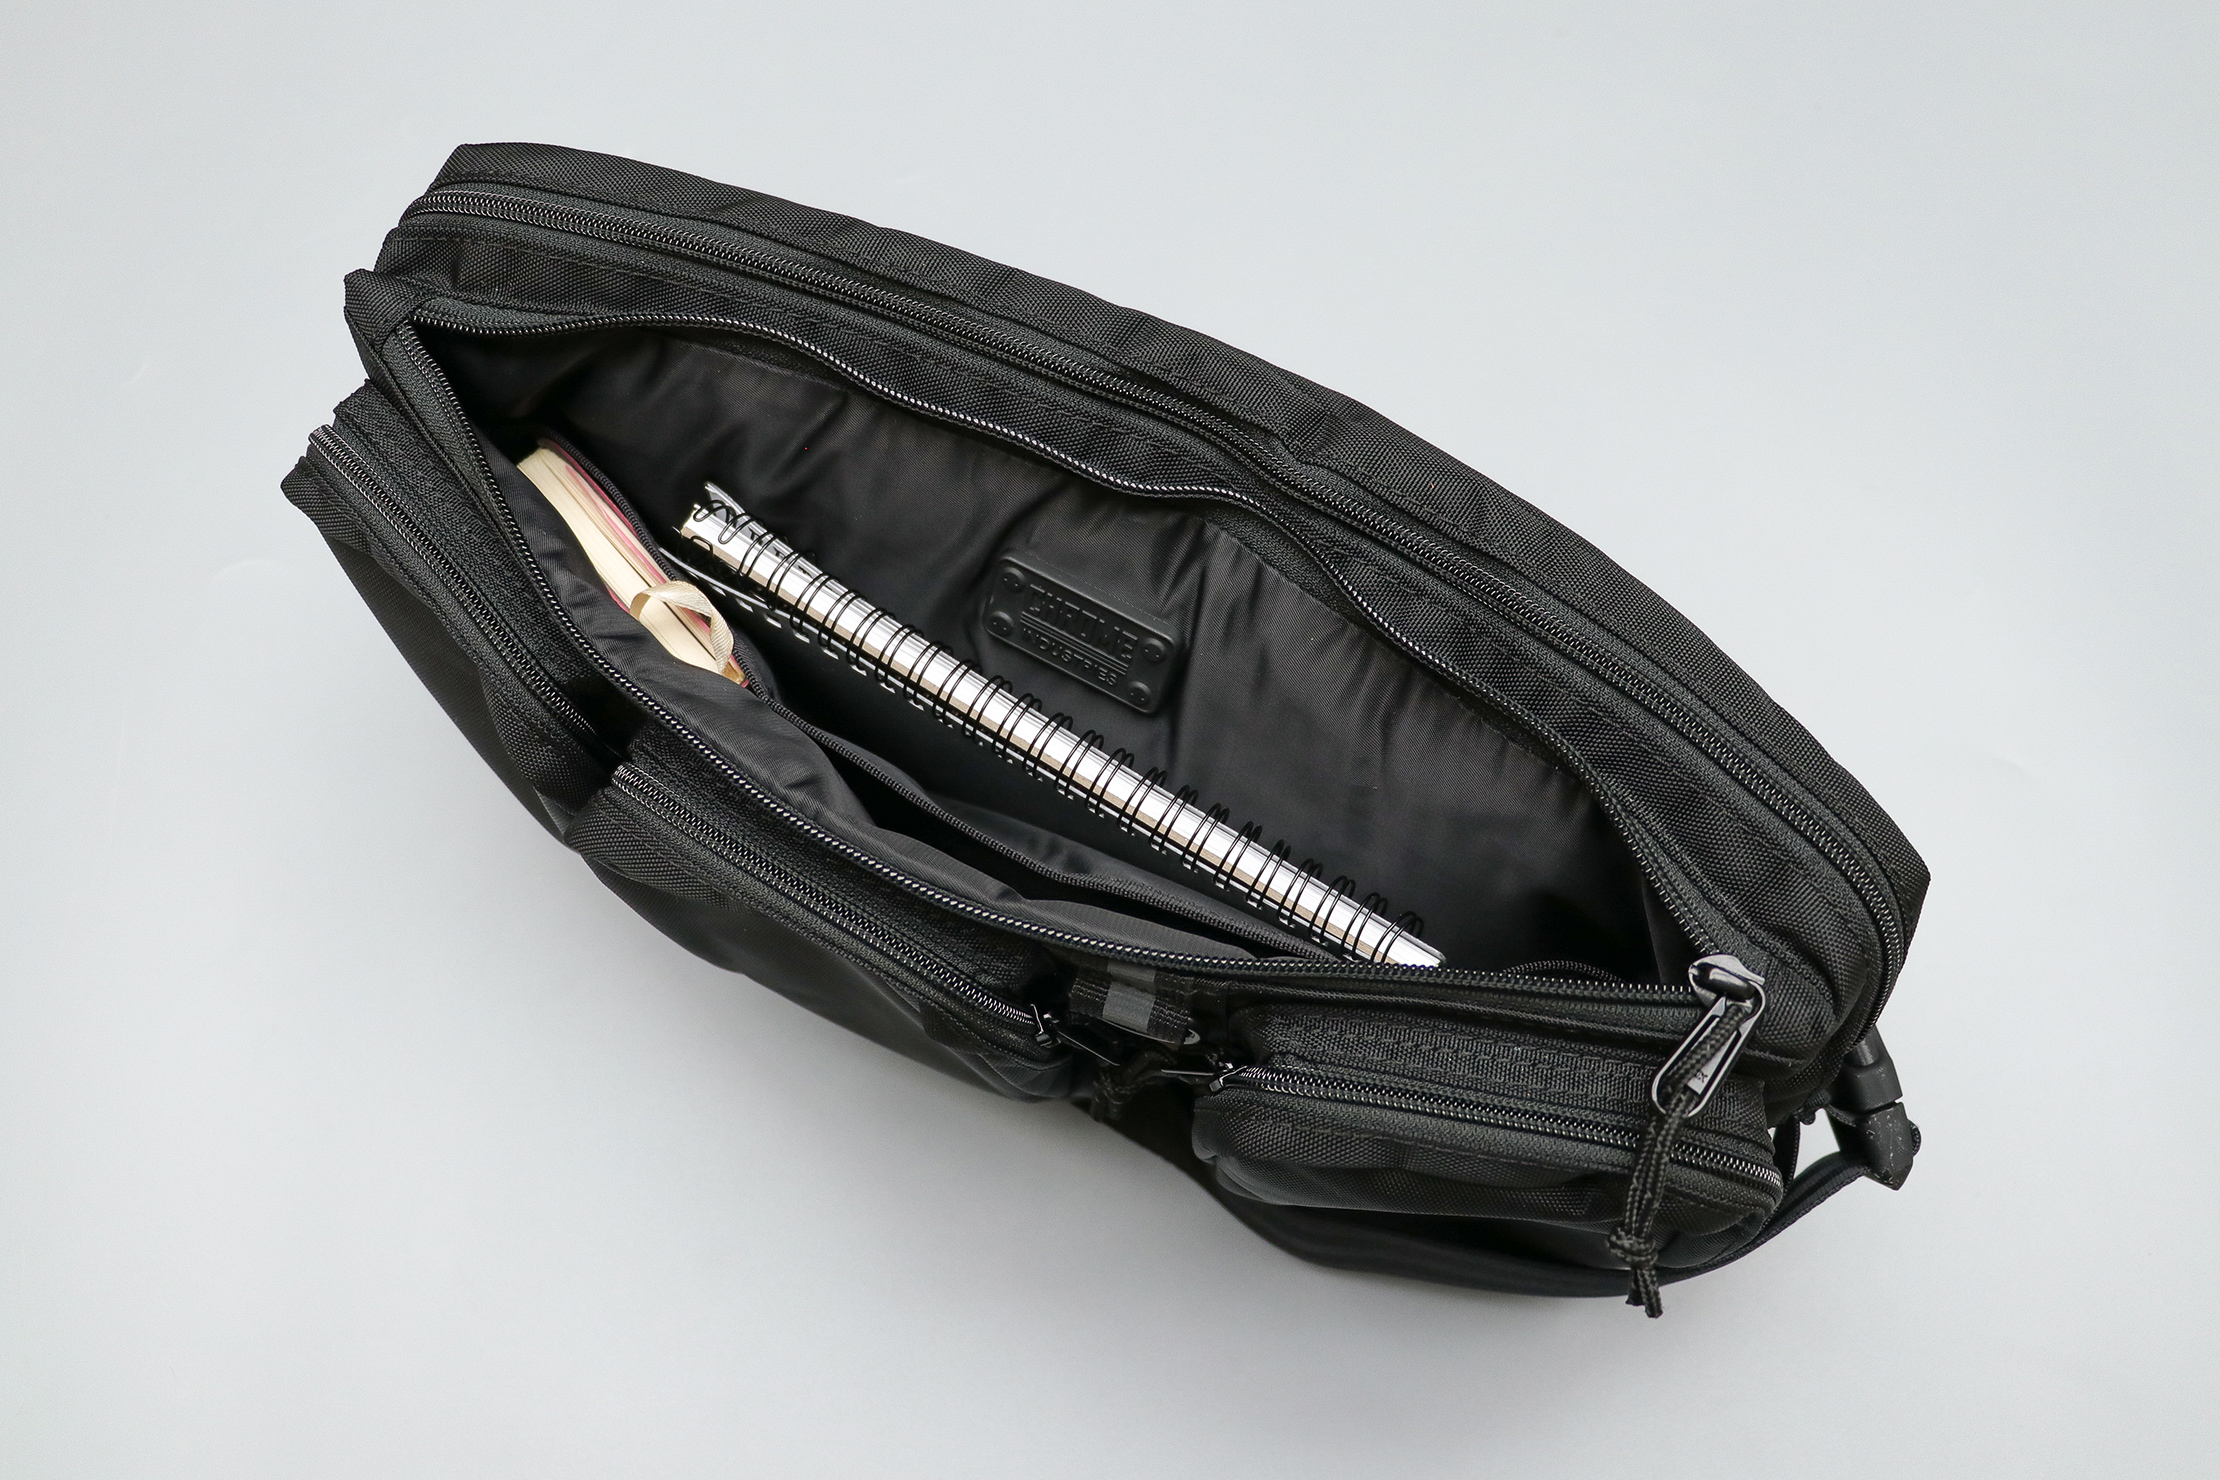 Chrome Industries MXD Link Sling Main Compartment